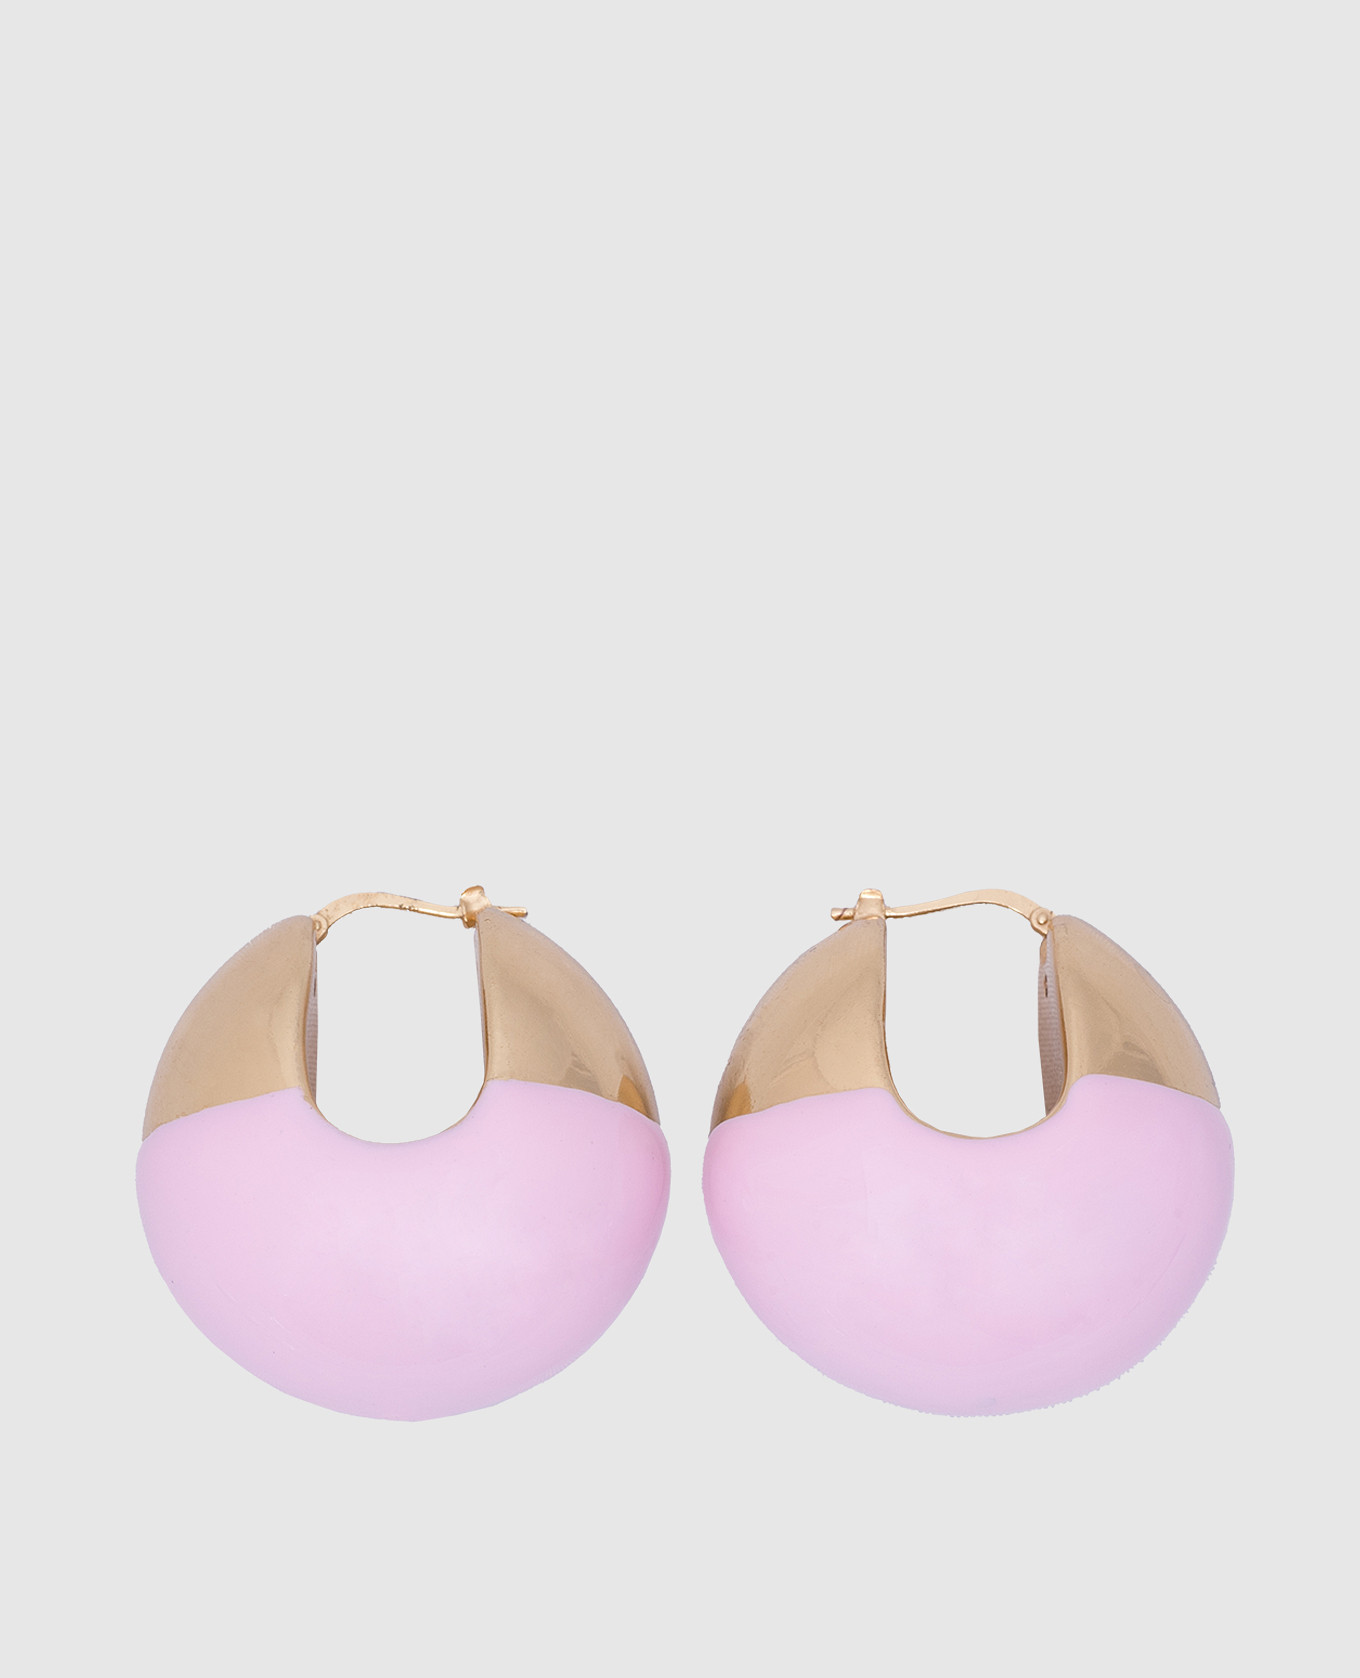 Pink Boule earrings with 24k gold plating